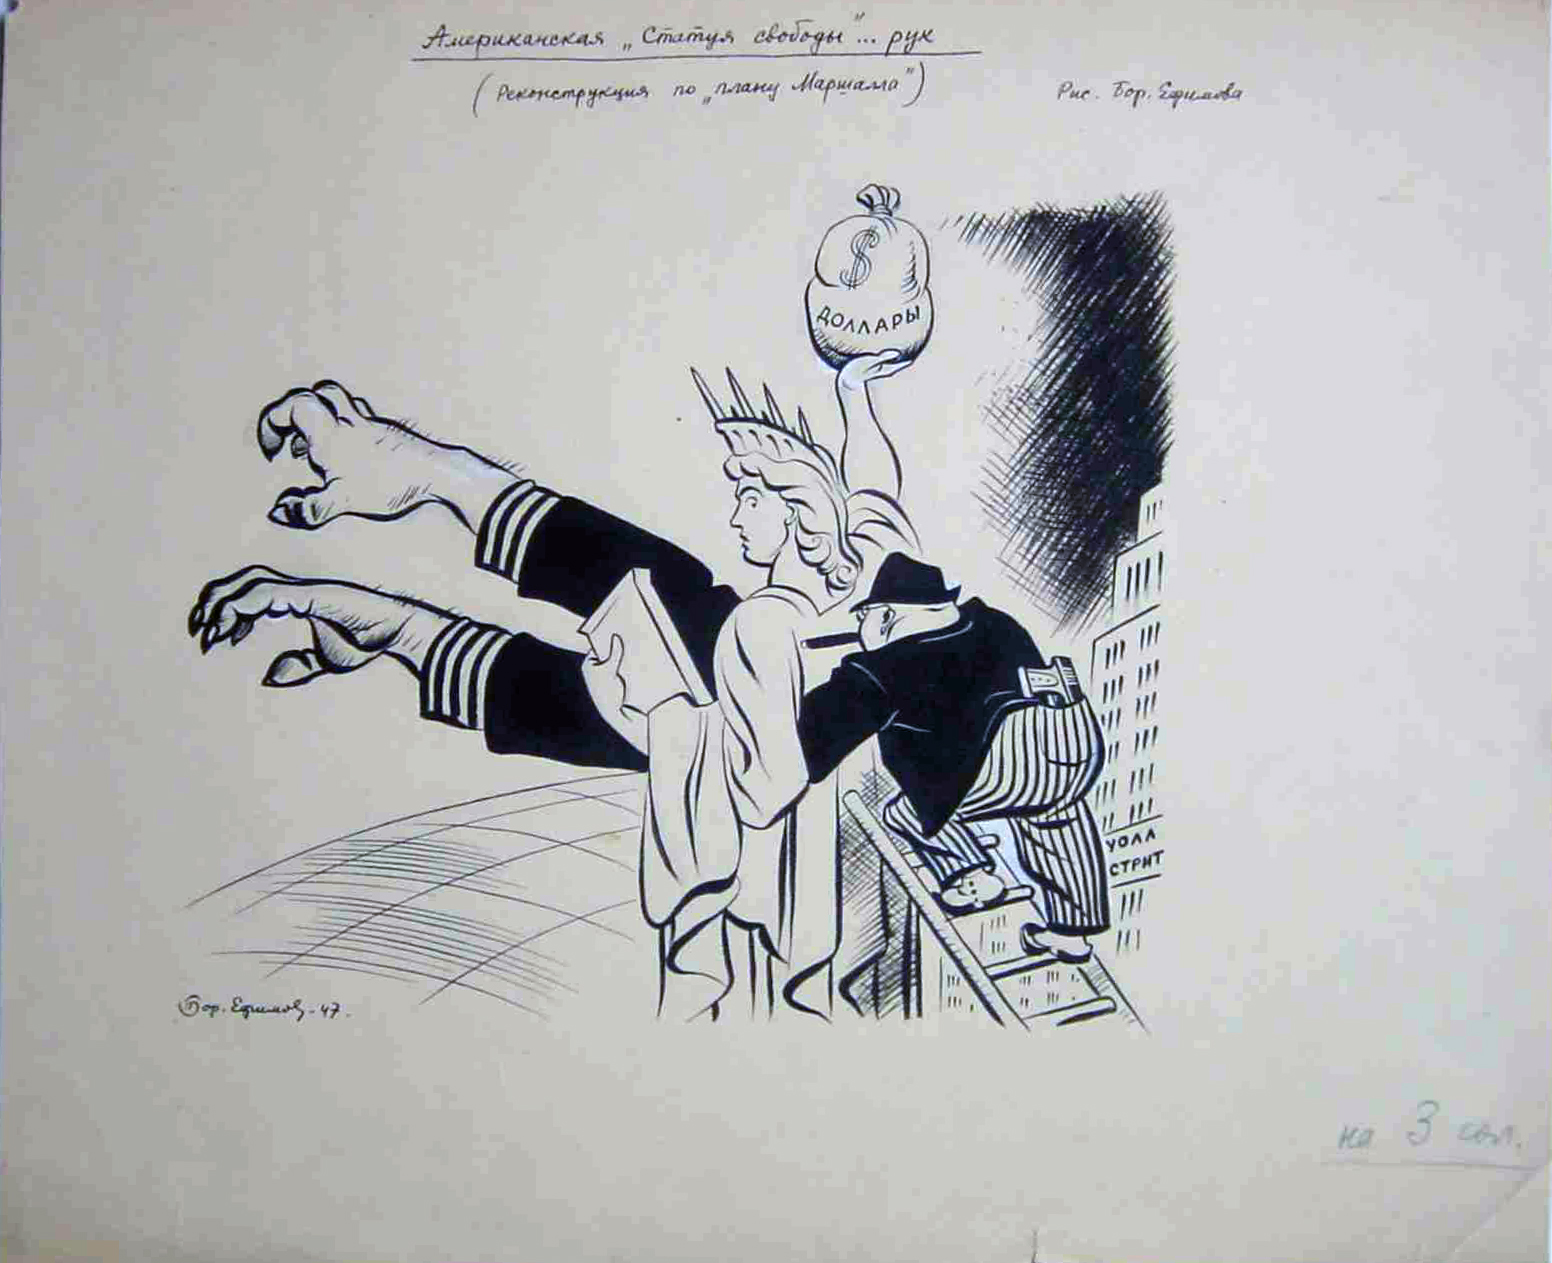 Efimov's 1947 cartoon: 'The American 'Statue of Liberty'... and Hand of Freedom.'